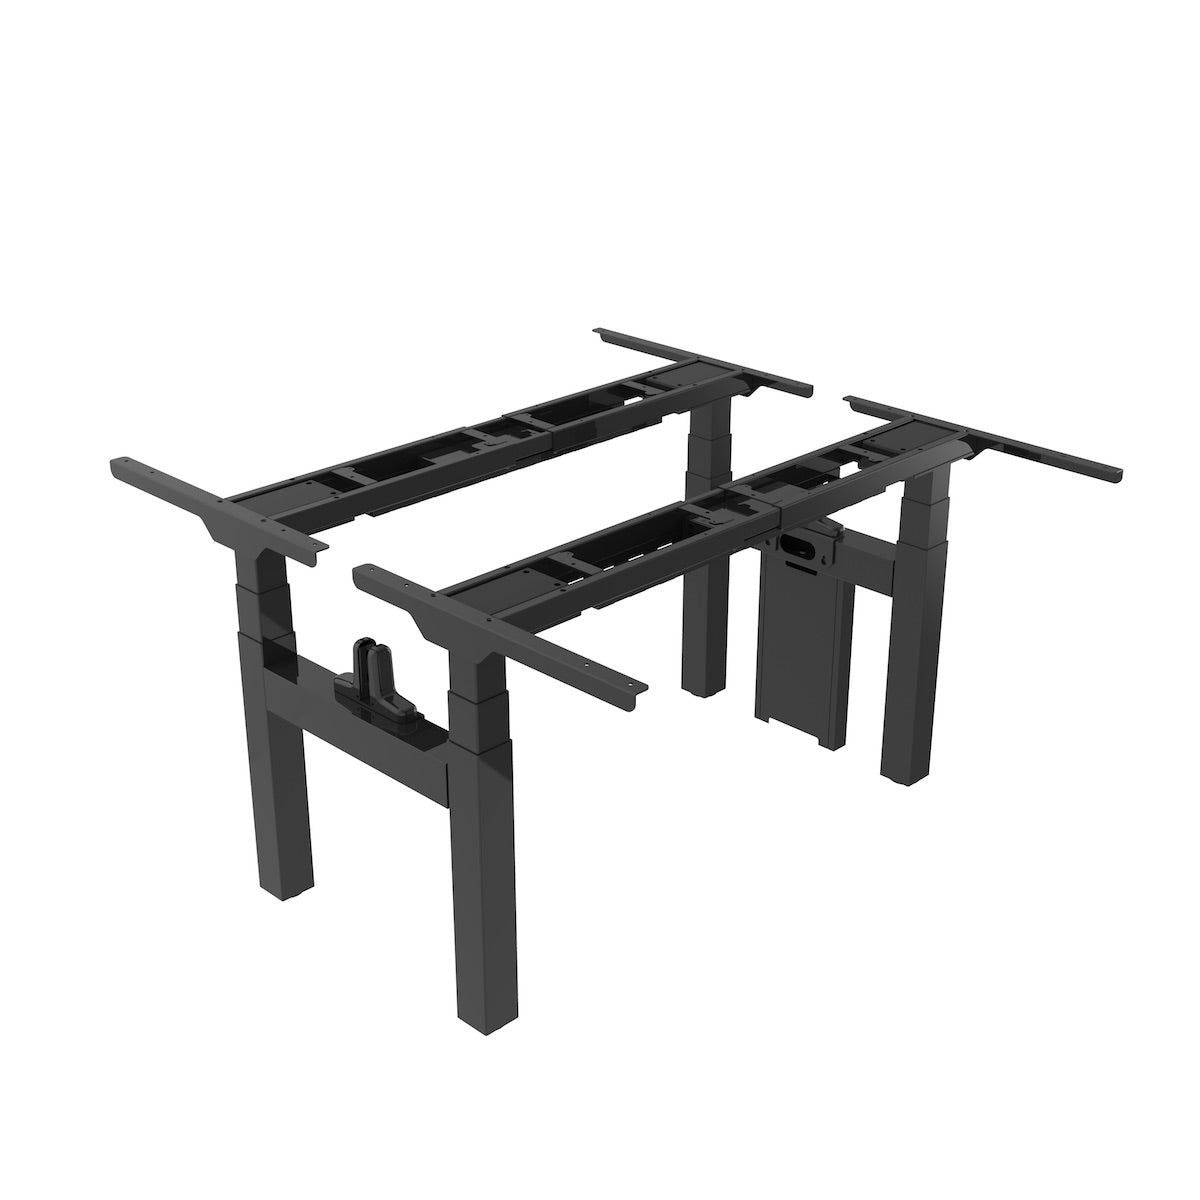 Electric Height Adjustable Dual Benching Desk - EW-ET223H